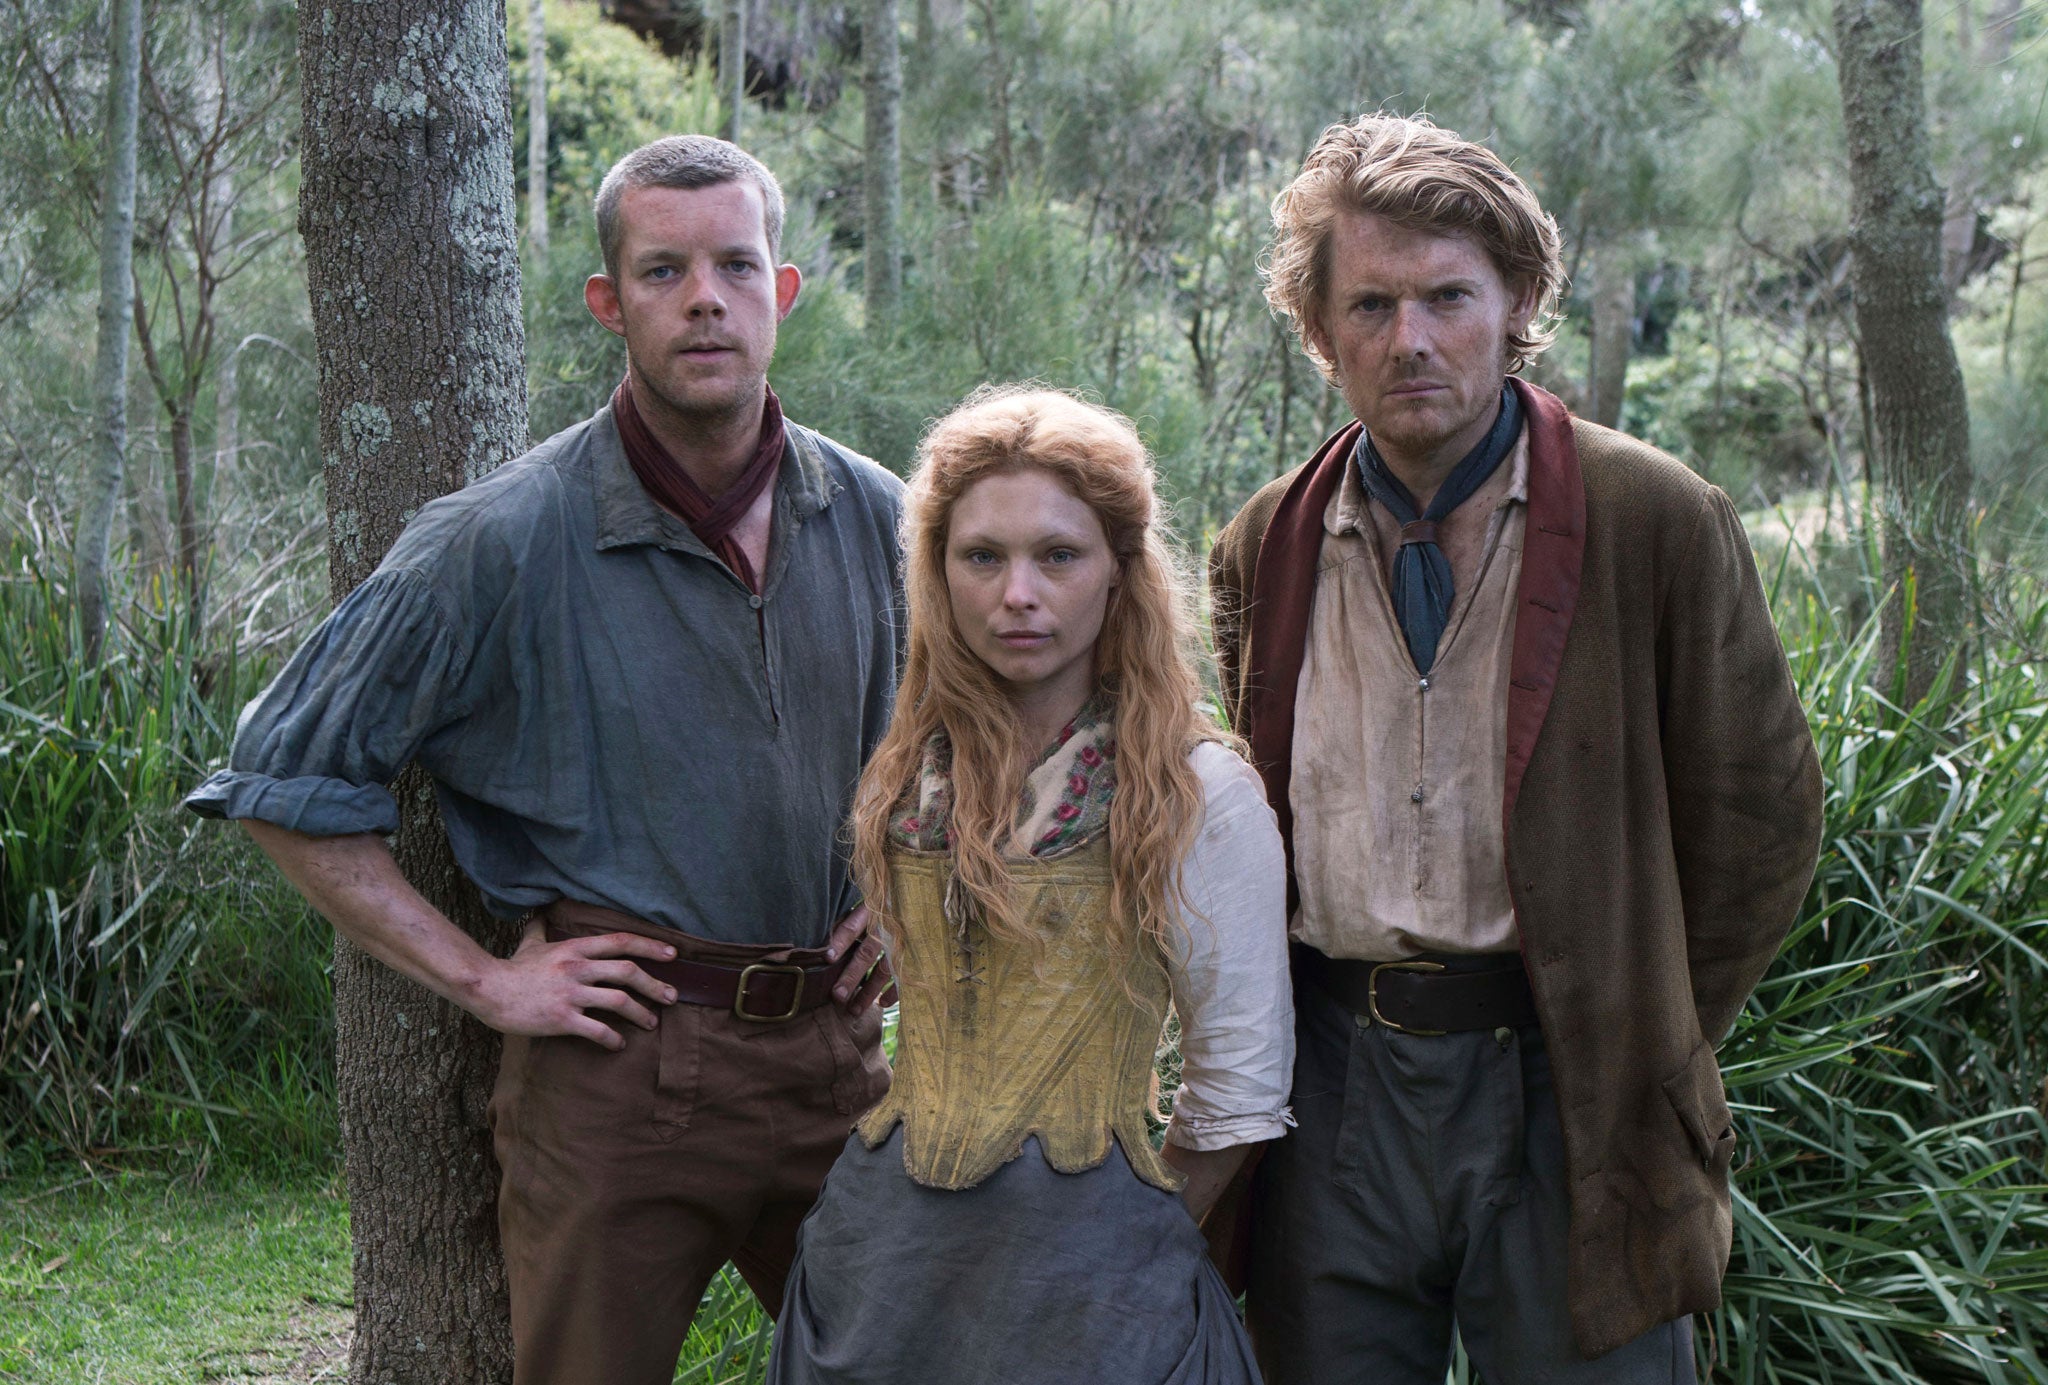 Russell Tovey, Myanna Buring and Julian Rhind Tutt star in Banished